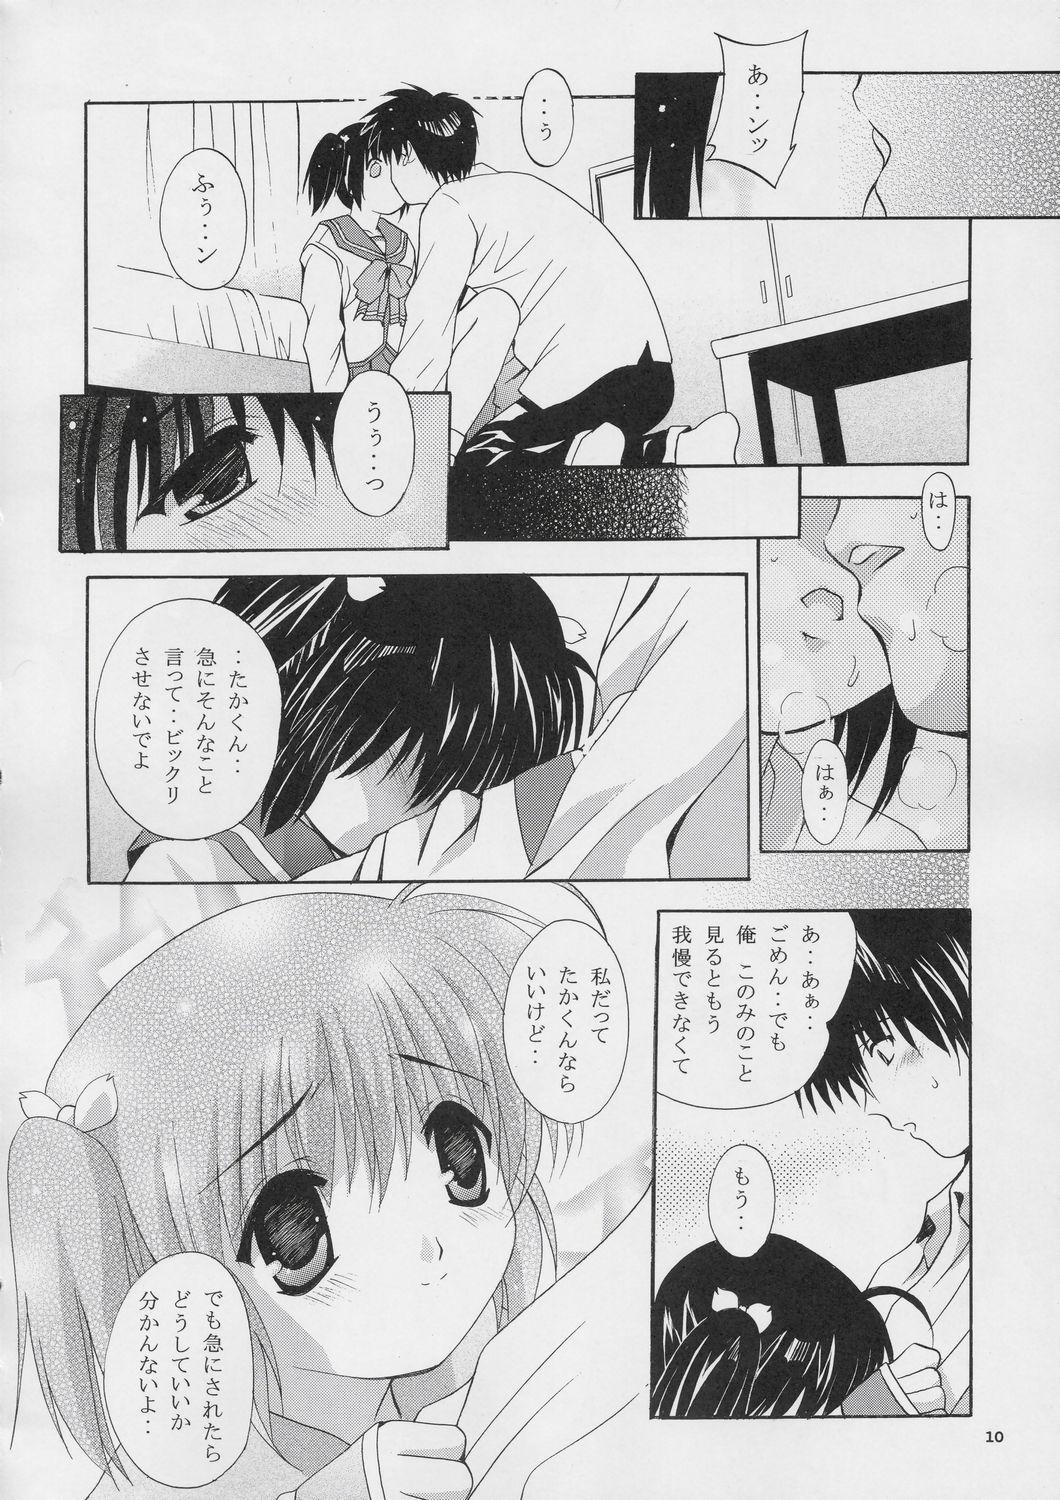 Vagina MOUSOU THEATER 16 - Toheart2 Assfingering - Page 9